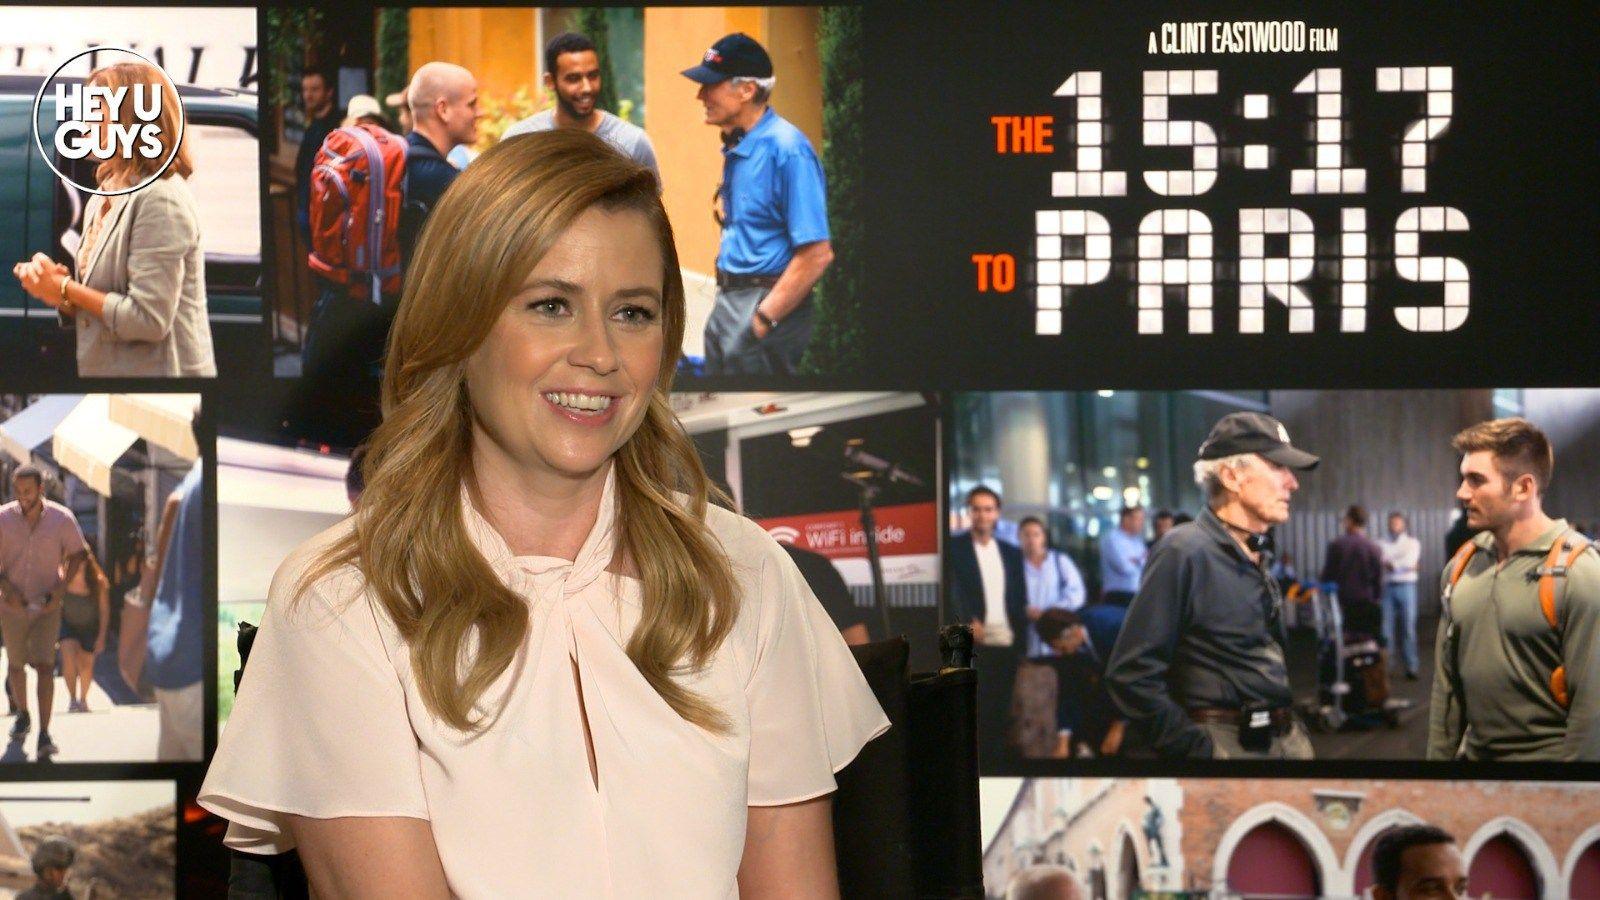 Exclusive Interview: Jenna Fischer on boarding The 15:17 to Paris